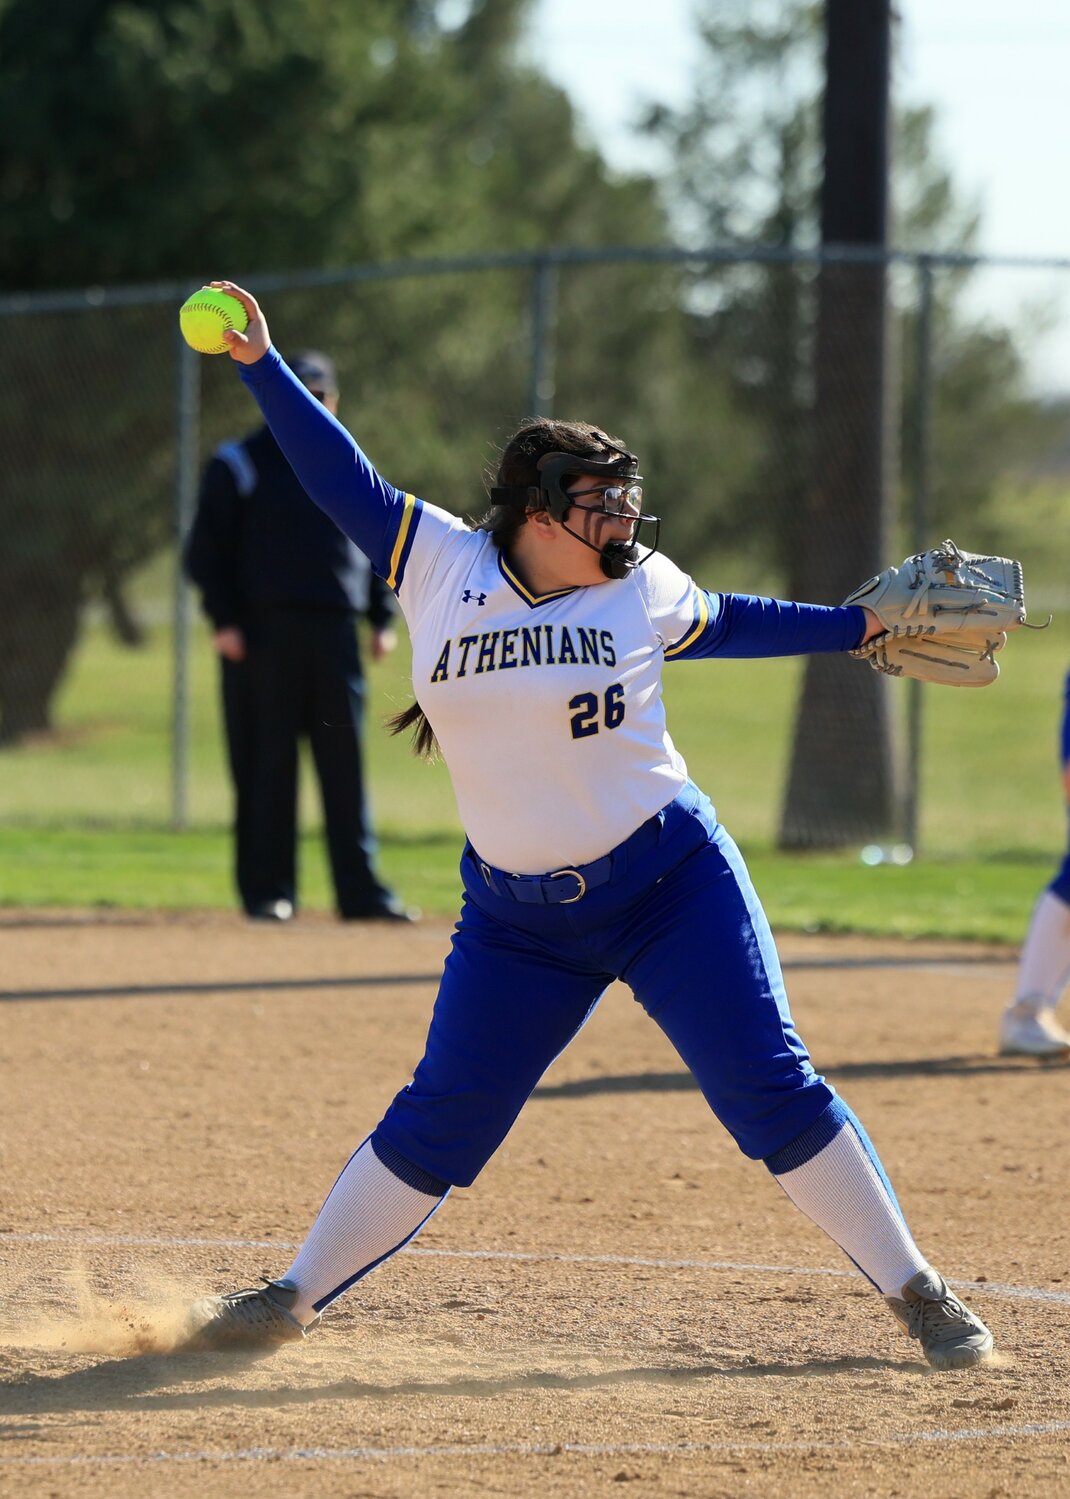 Freshman Angeli Martinez got the start in the circle and made her varsity debut.